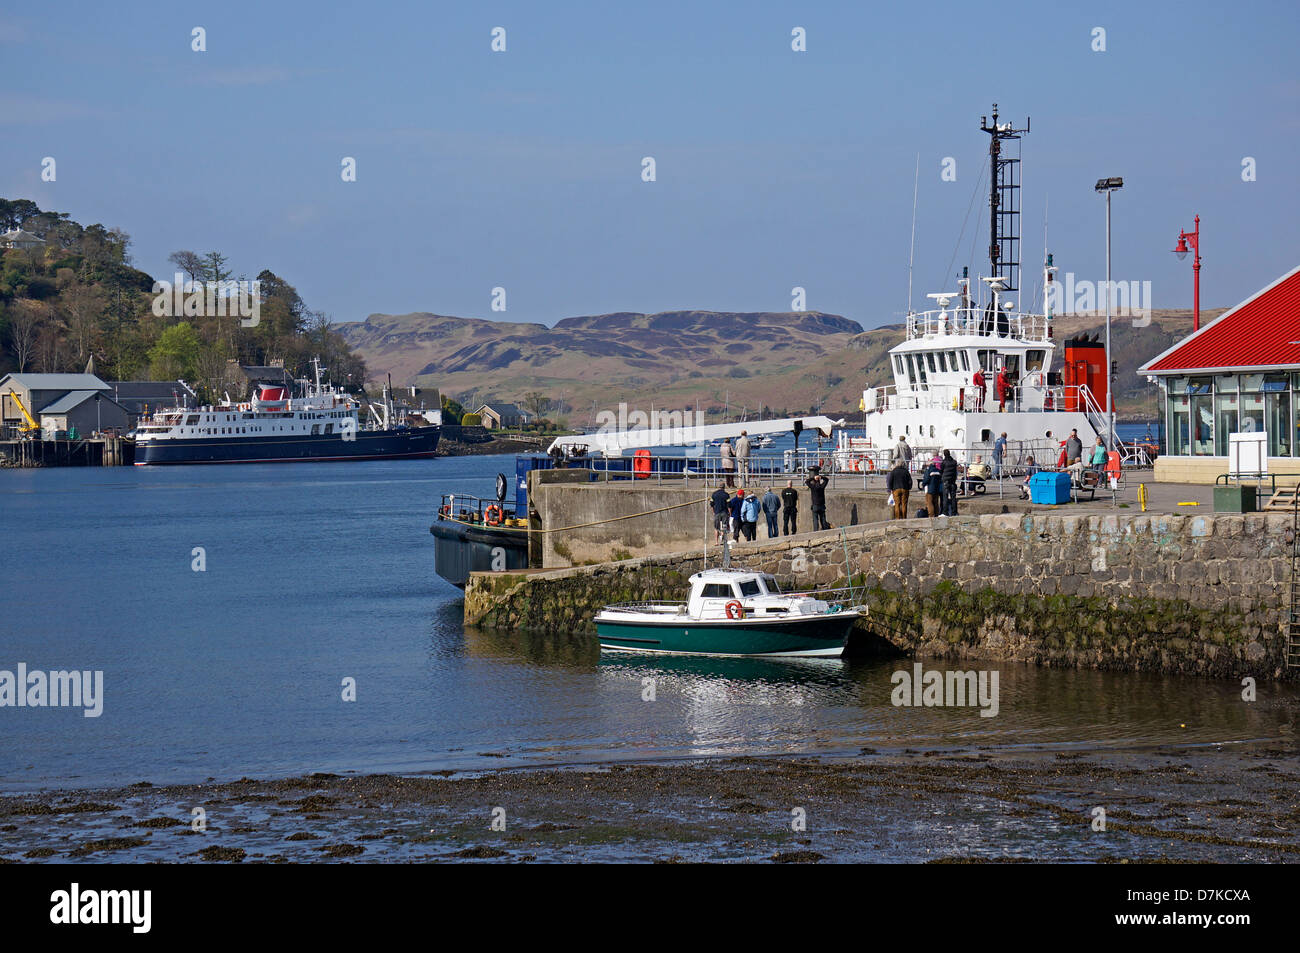 View across Oban Bay to Hebridean Princess with diving platform SD Moorhen moored at the North Pier in Oban Harbour Scotland Stock Photo